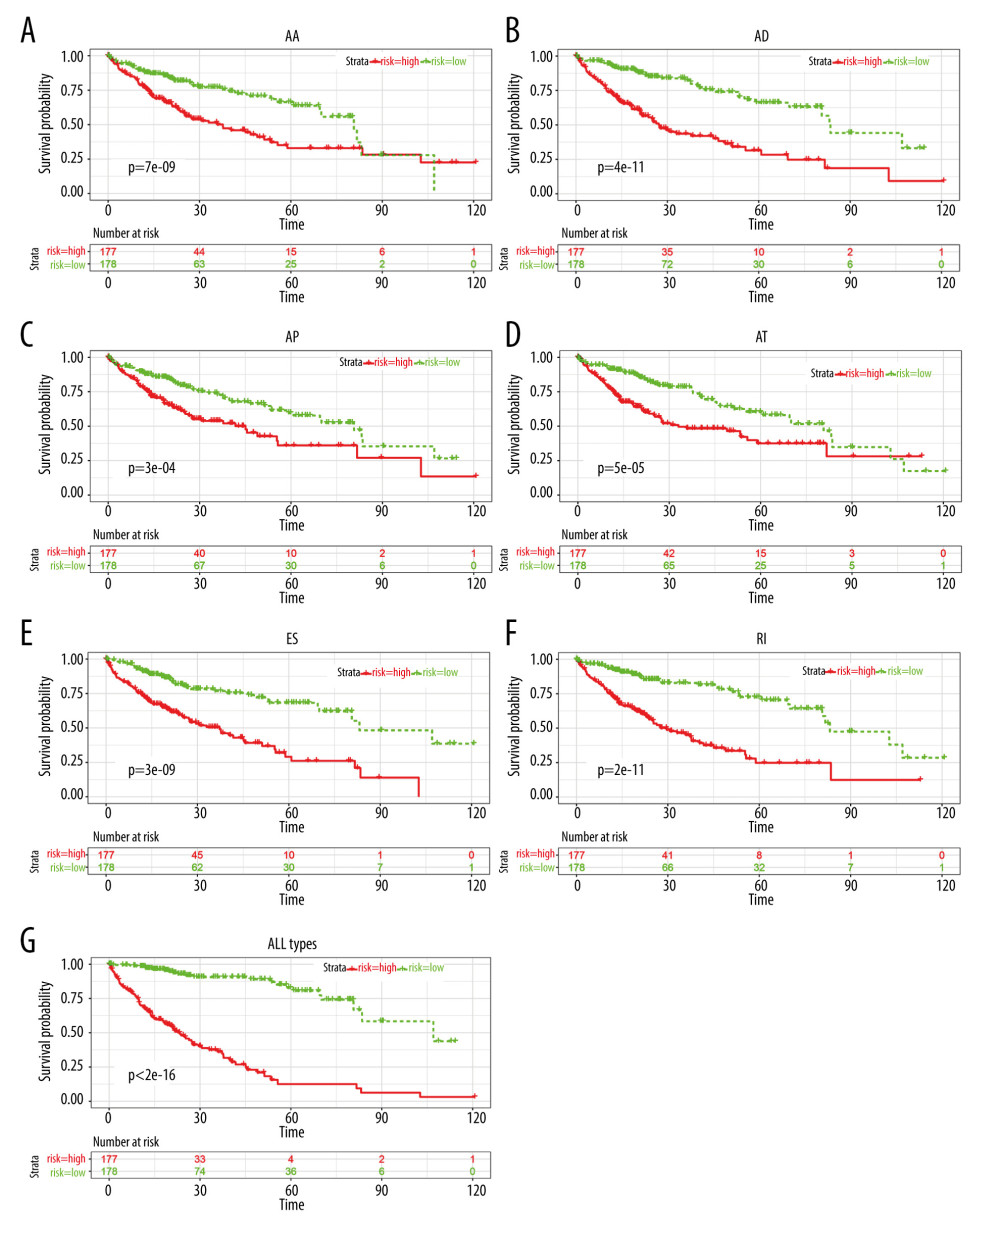 Kaplan-Meier plot of prognostic predictors in HCC patients. (A–F) Kaplan-Meier plot showing the overall survival probability over time for prognosis prediction of 6 types of AS events with low (green) risk group and high (red). (G) Kaplan-Meier plot showing the survival probability over time for the final prognostic predictor with low-risk group (green) and high-risk group (red).